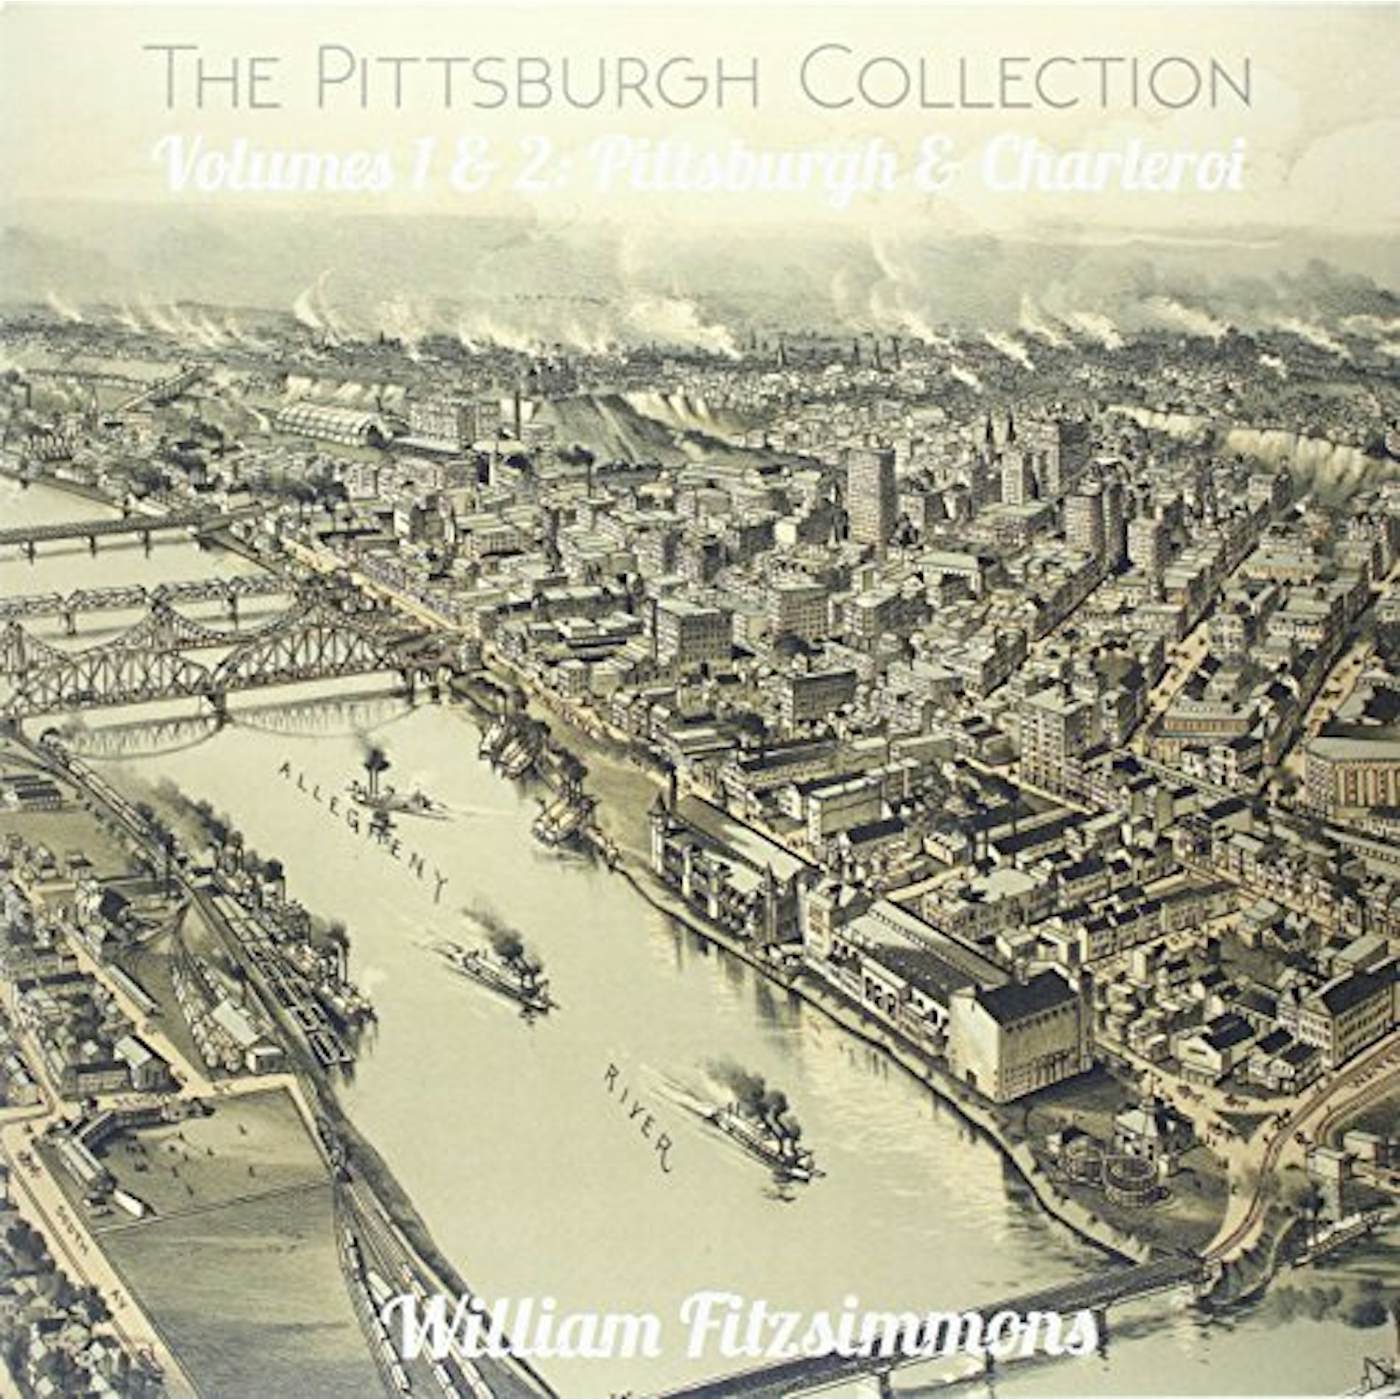 William Fitzsimmons PITTSBURGH COLLECTION Vinyl Record